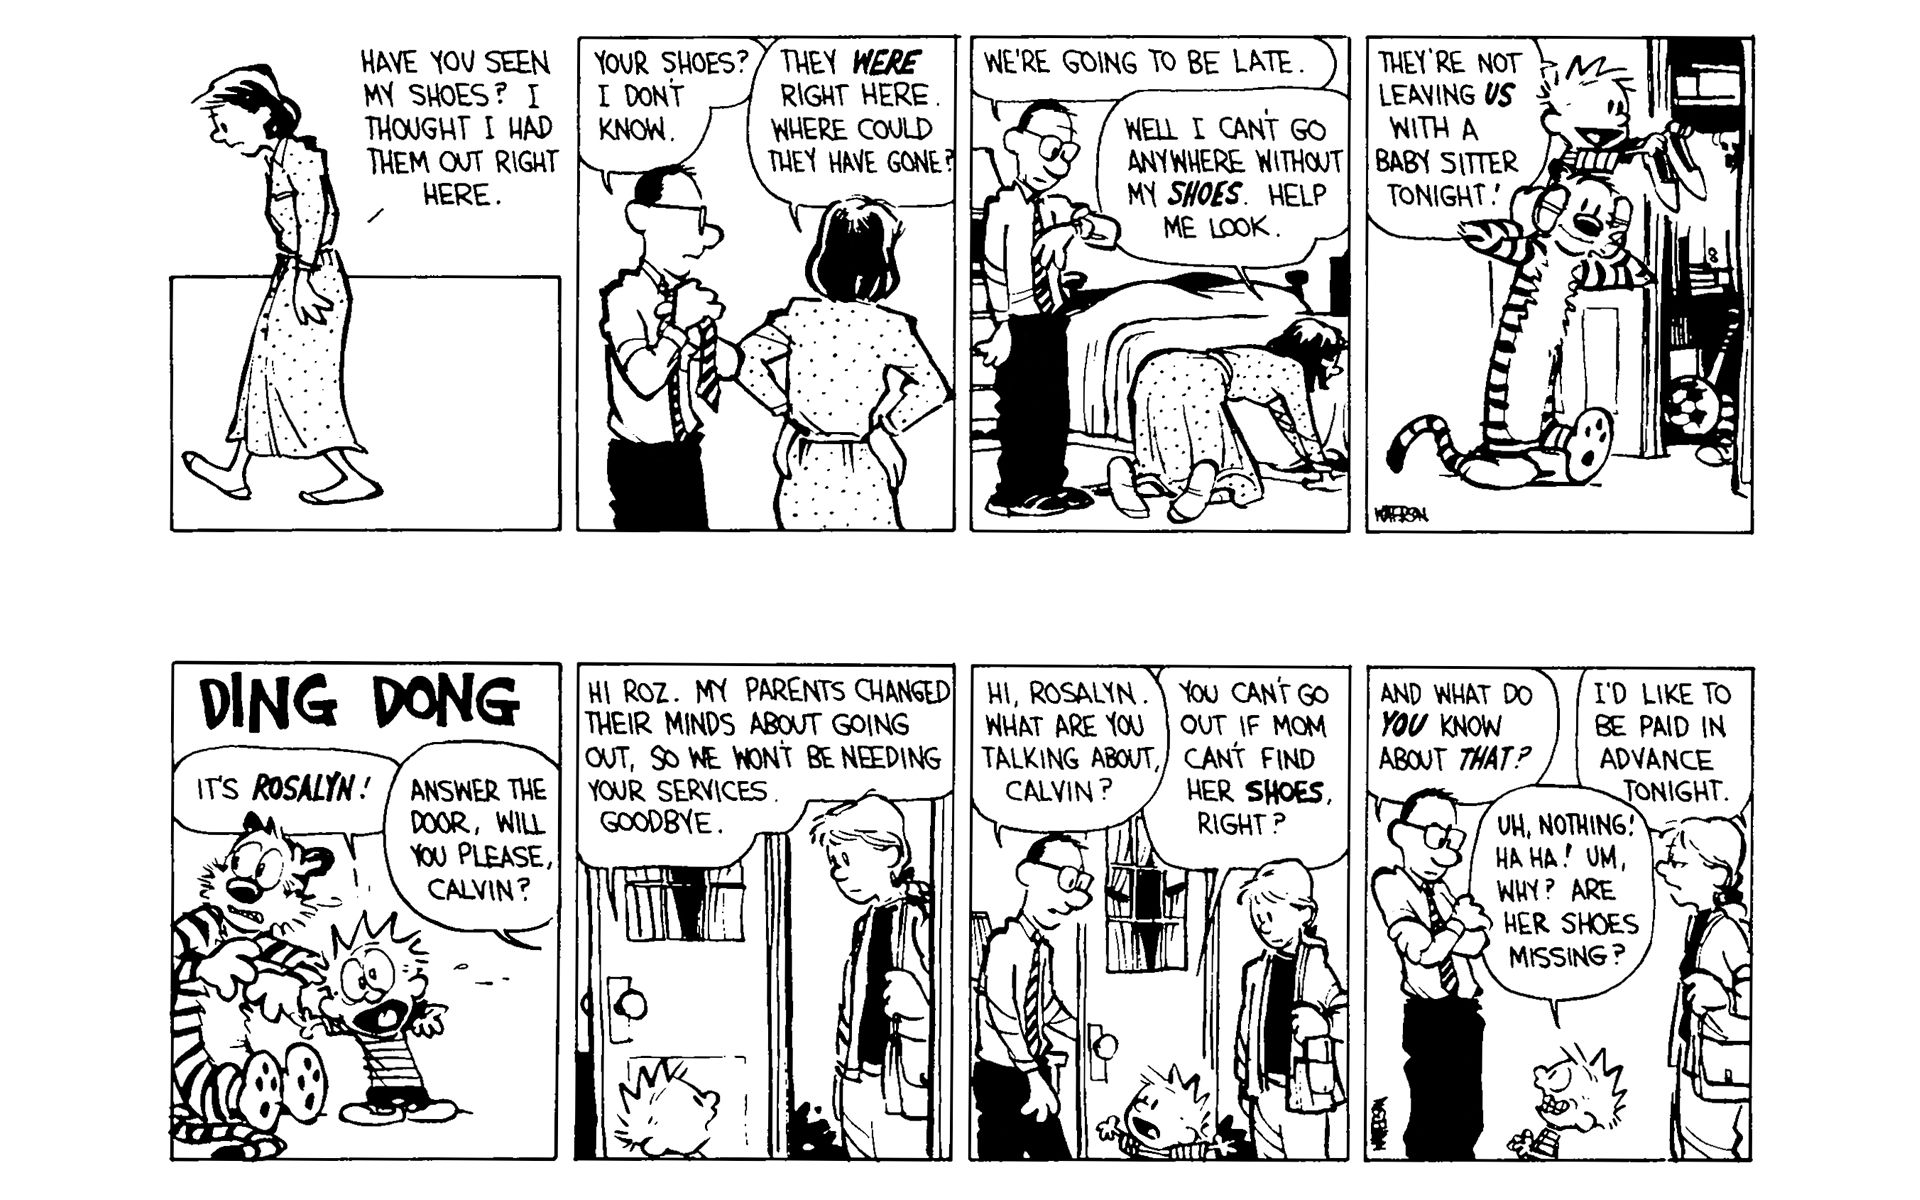 Calvin And Hobbes Issue 6 | Read Calvin And Hobbes Issue 6 comic online in  high quality. Read Full Comic online for free - Read comics online in high  quality .